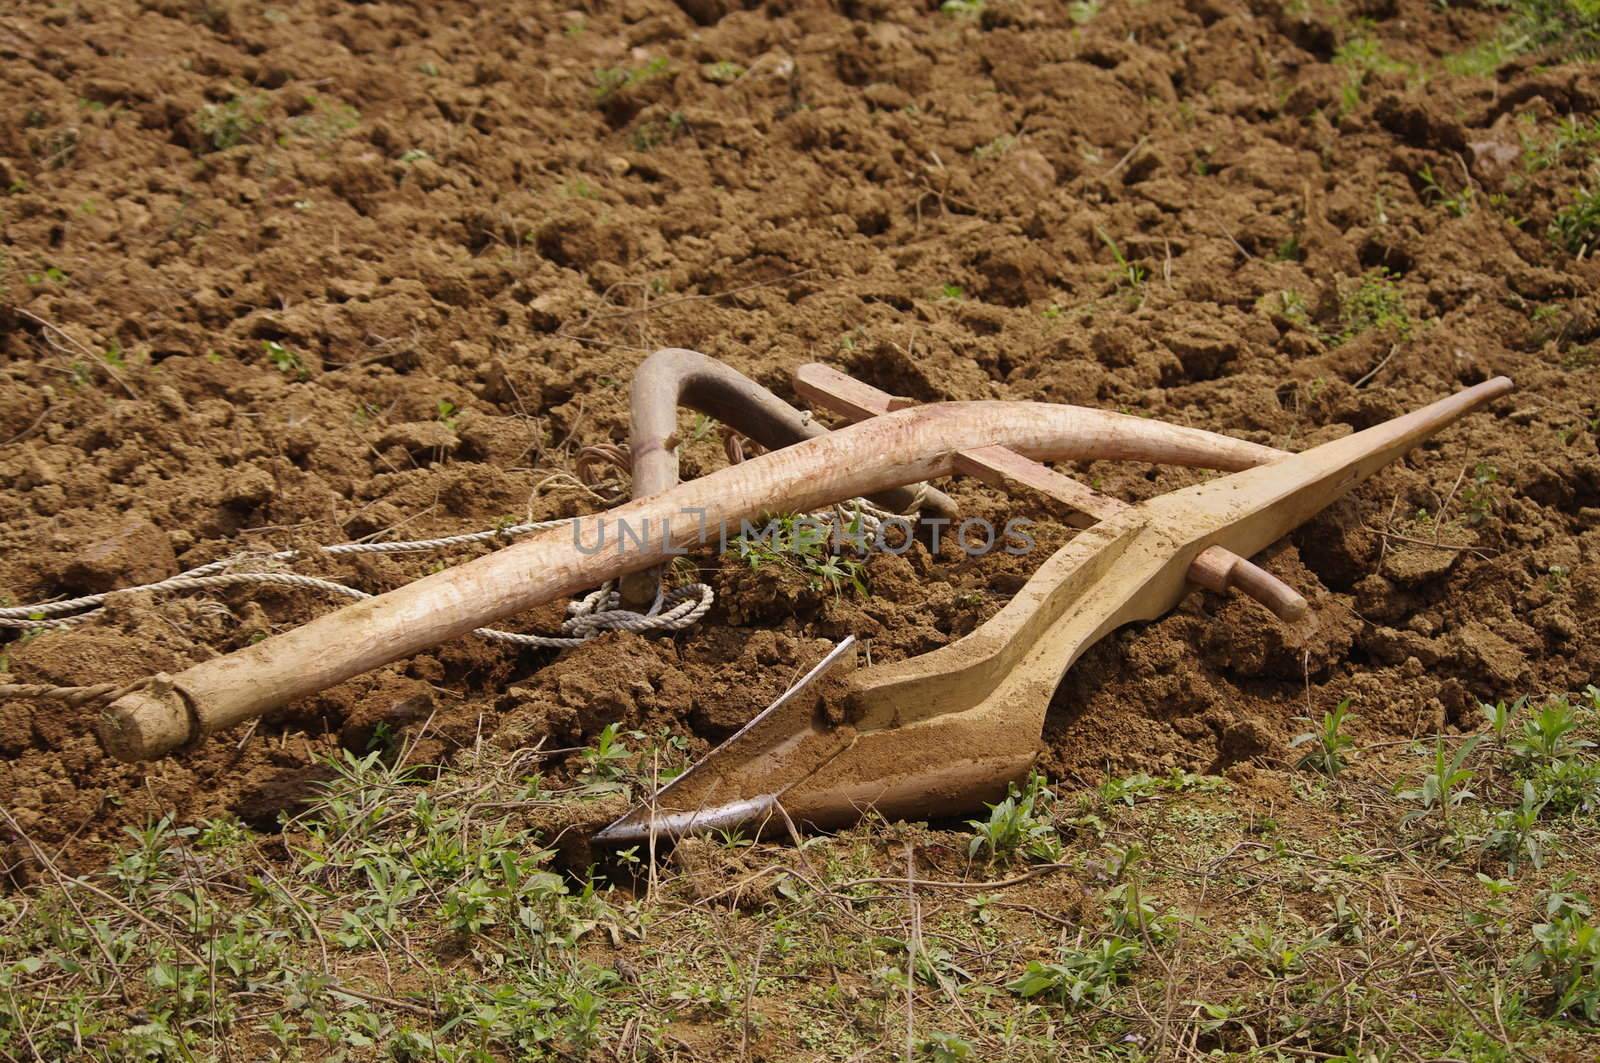 The ancestors labored with the same plow. The plow peasants in northern Vietnam. Plow mono arms in wood. Only soc triangular shape is curved steel